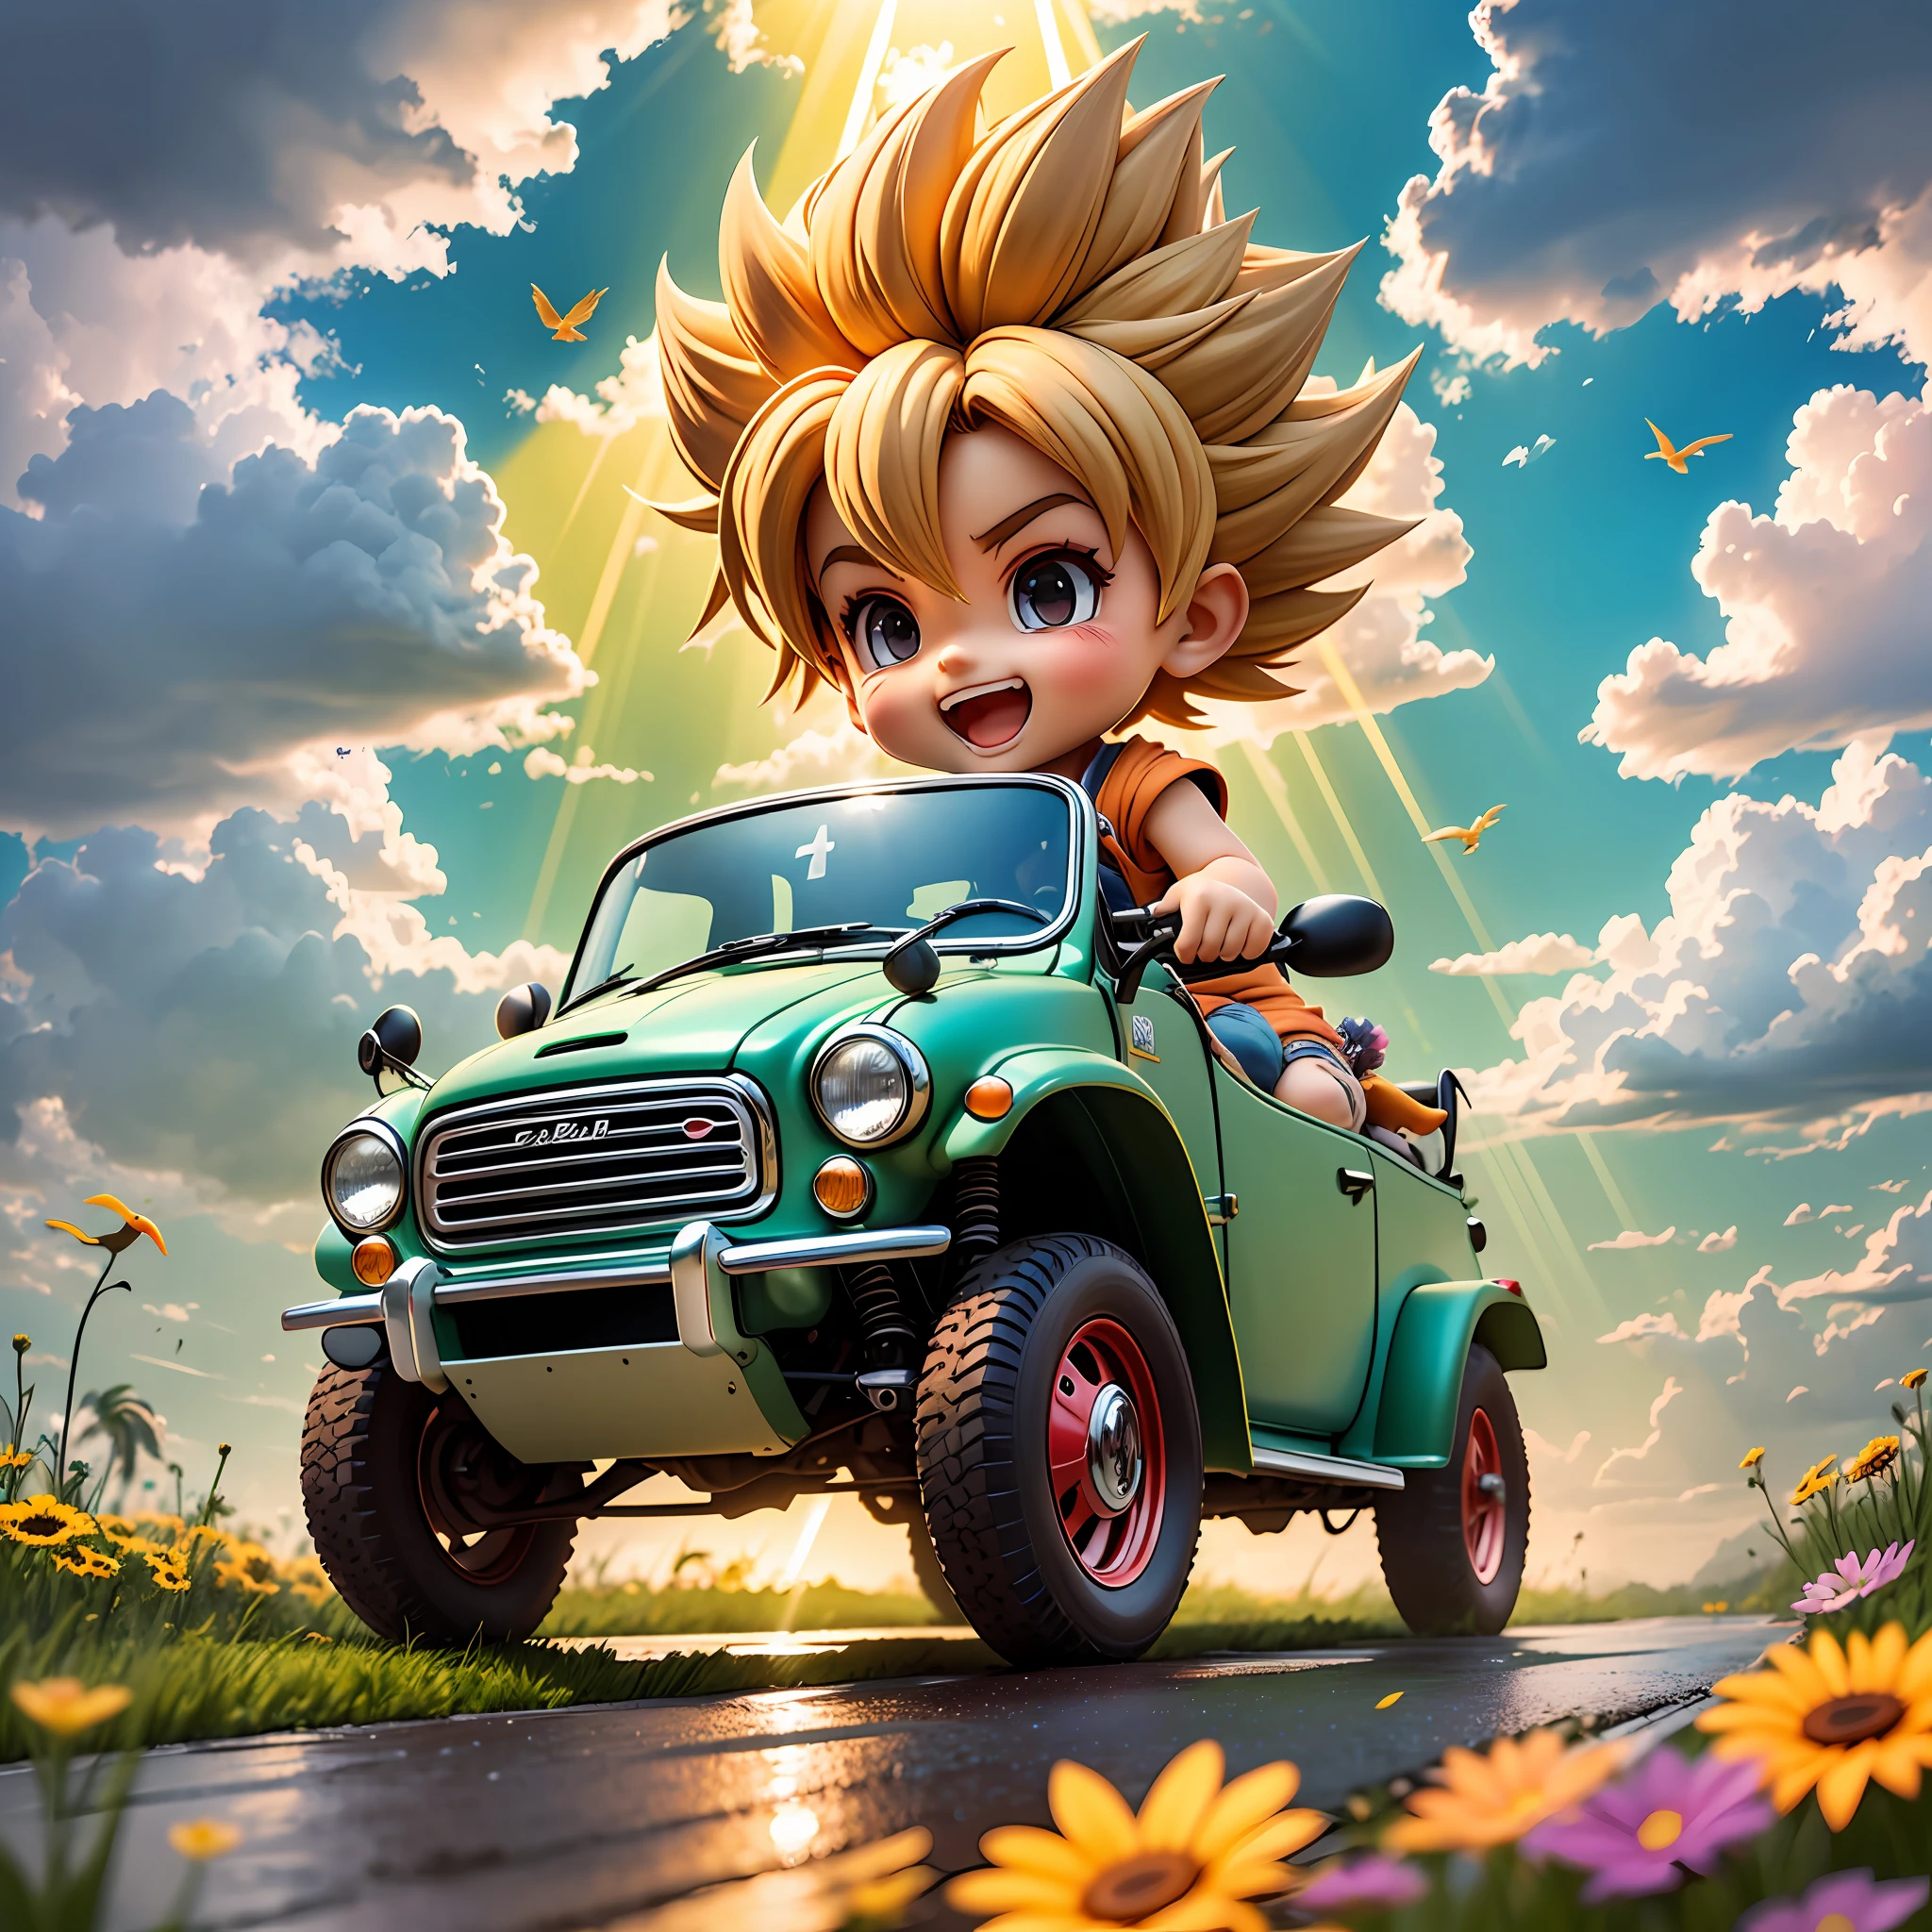 rains，Clouds，sunrays，highway，Little boy who opens an open-top buggy，son goku，SuperSaiyan，big laughter，Spiked hairstyle，Flowers，yama，kali，The bird，Rich colors，The Masterpiece，chibi，full body